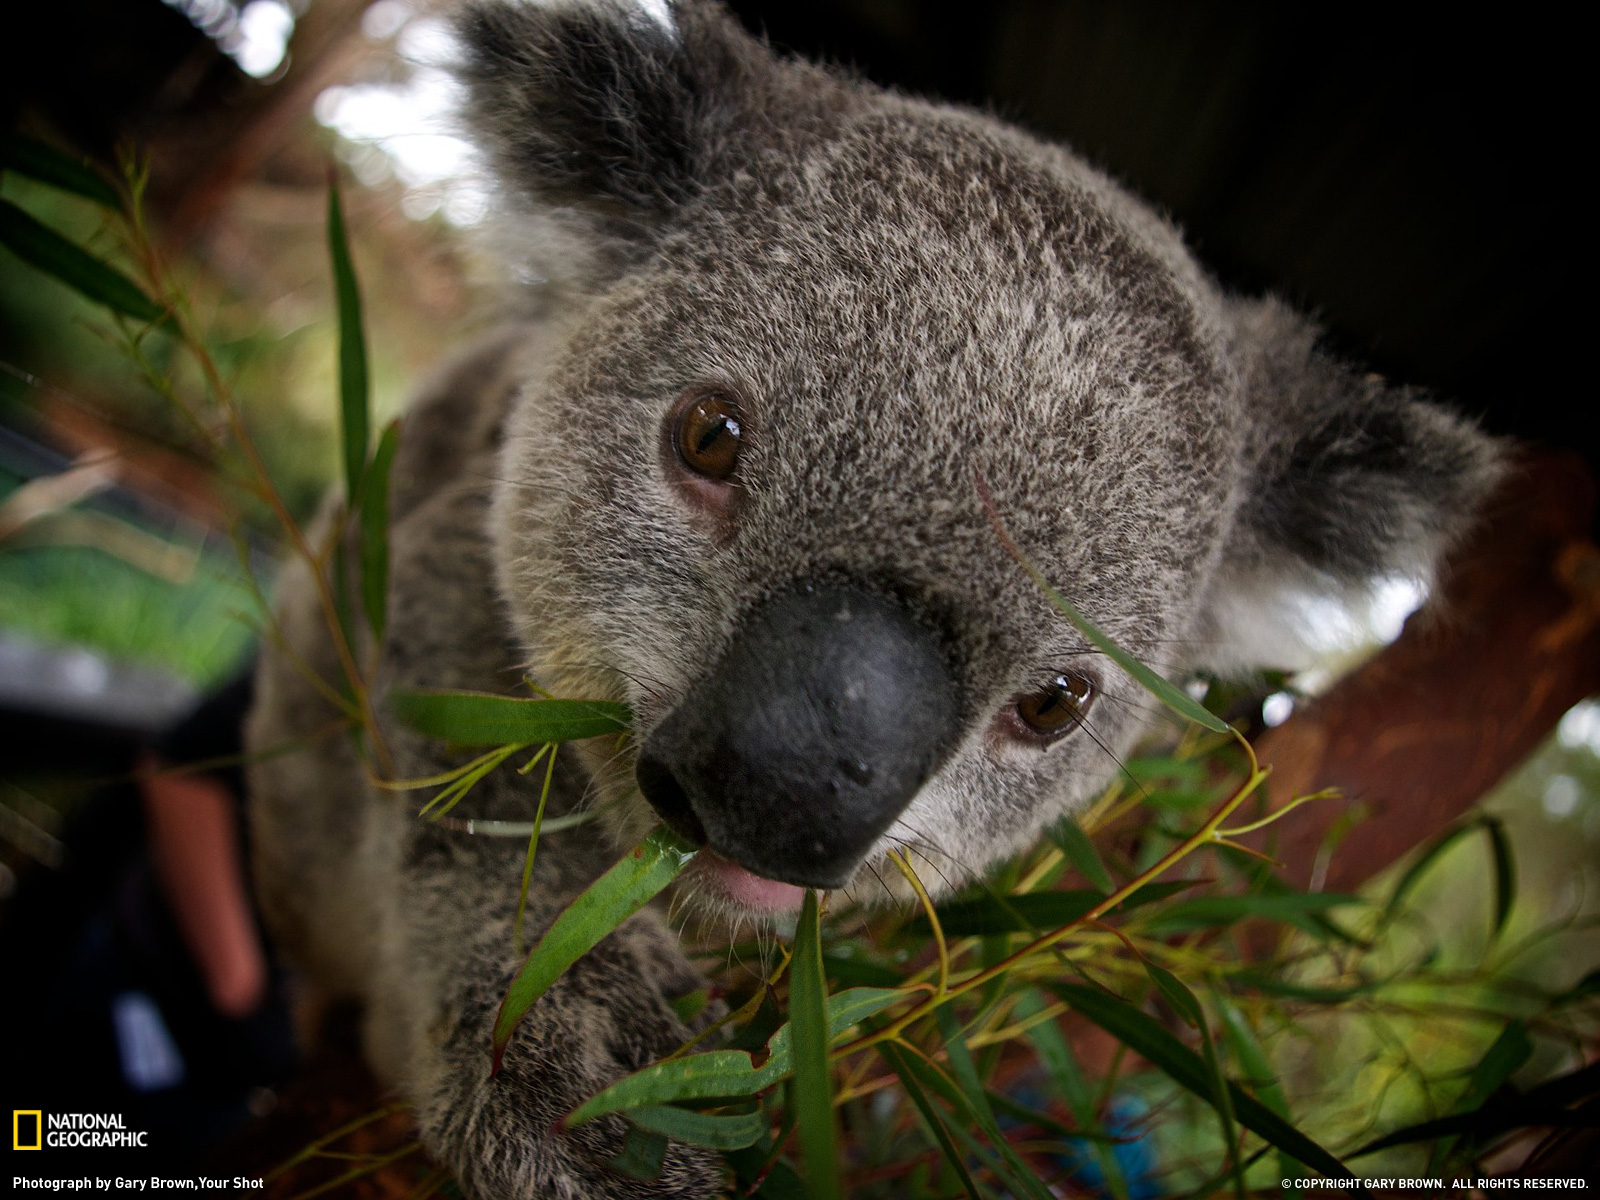 Koala Picture Animal Wallpaper National Geographic Photo Of The